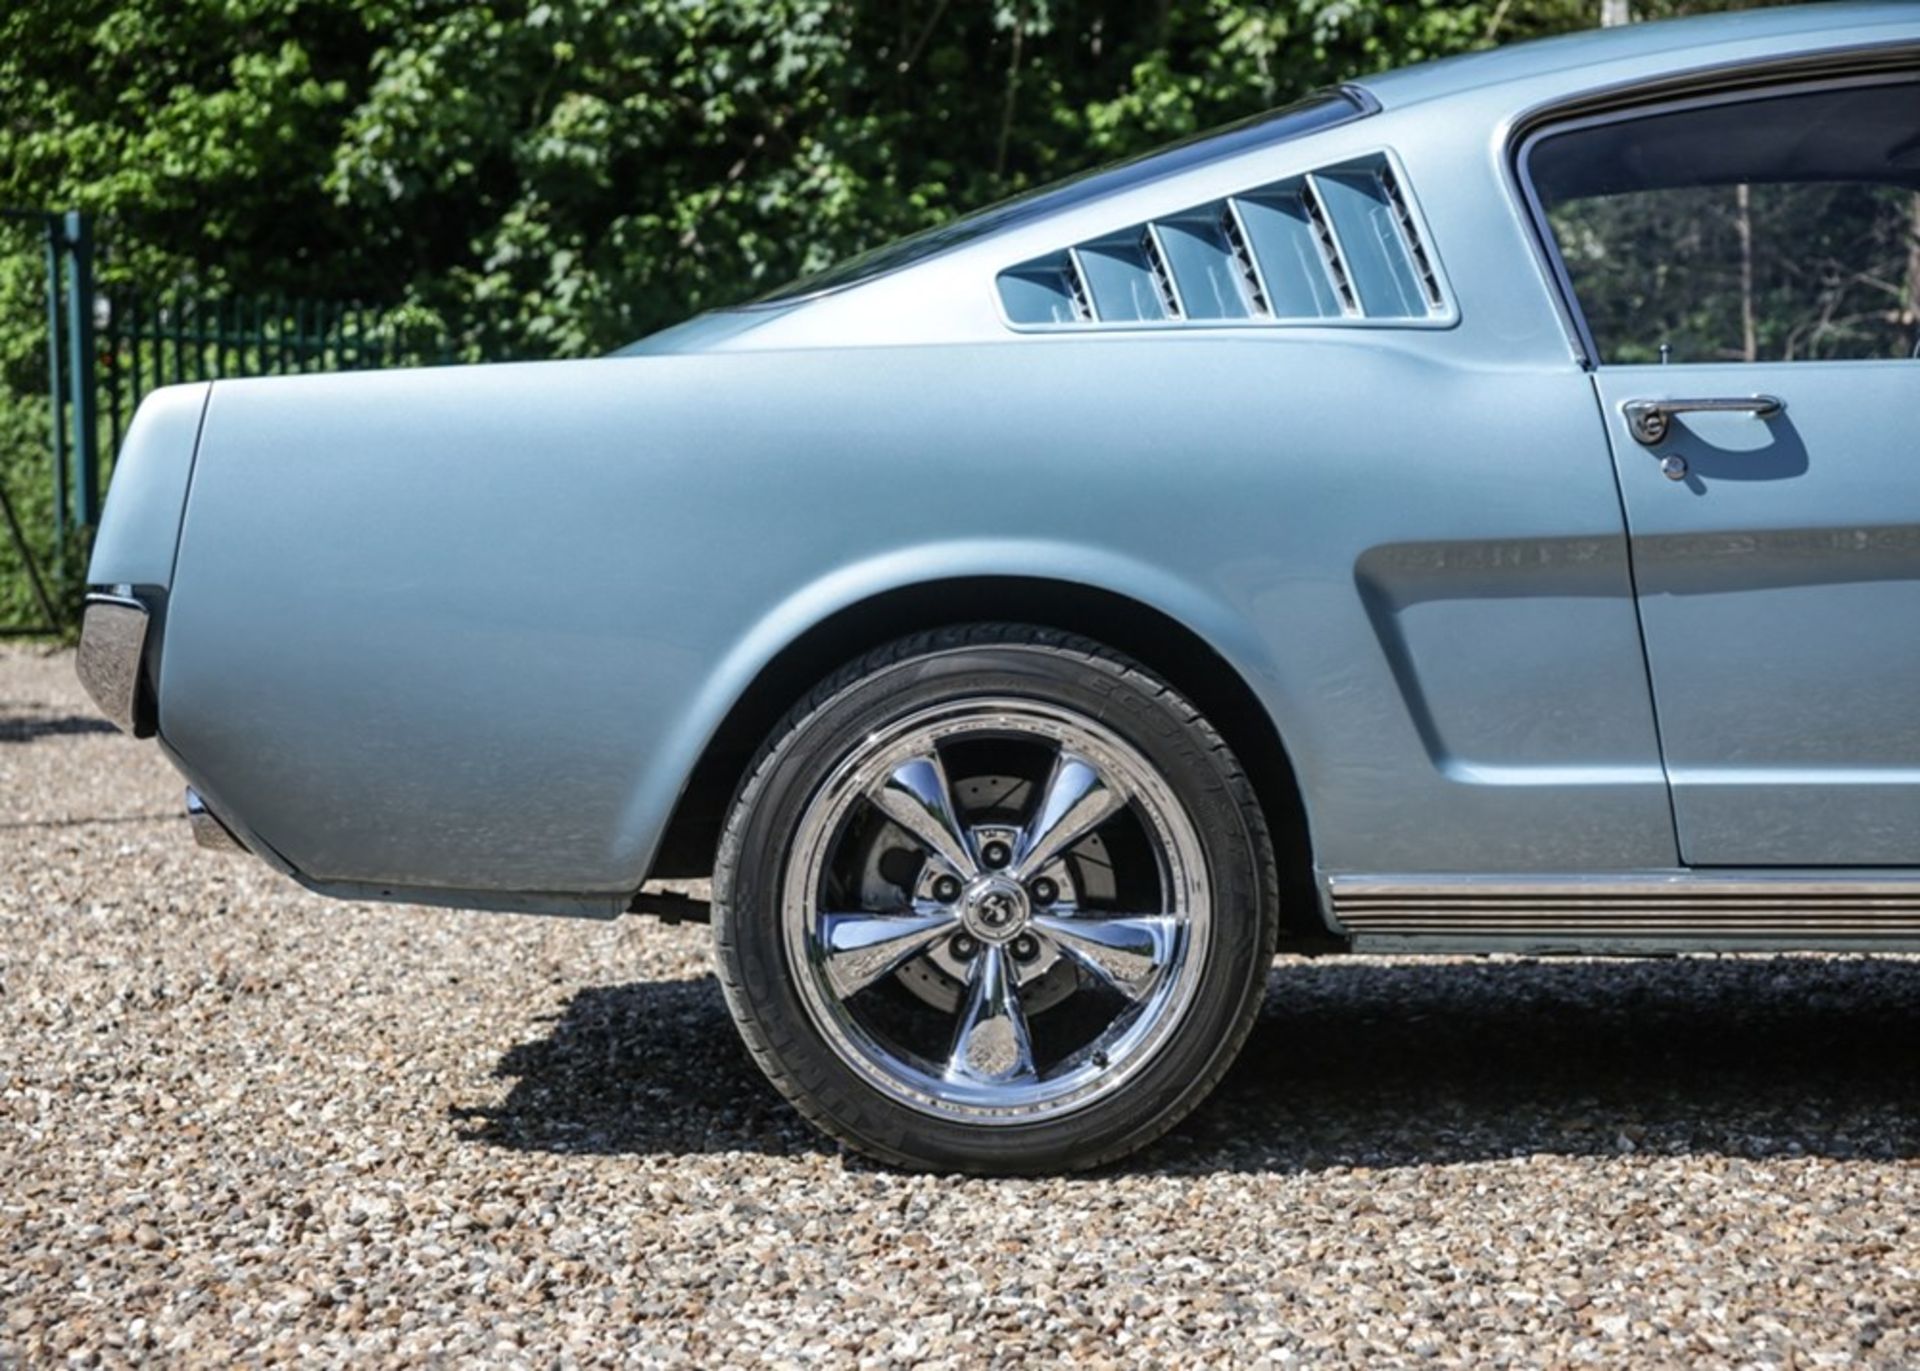 1966 Ford Mustang Fastback - Image 5 of 9